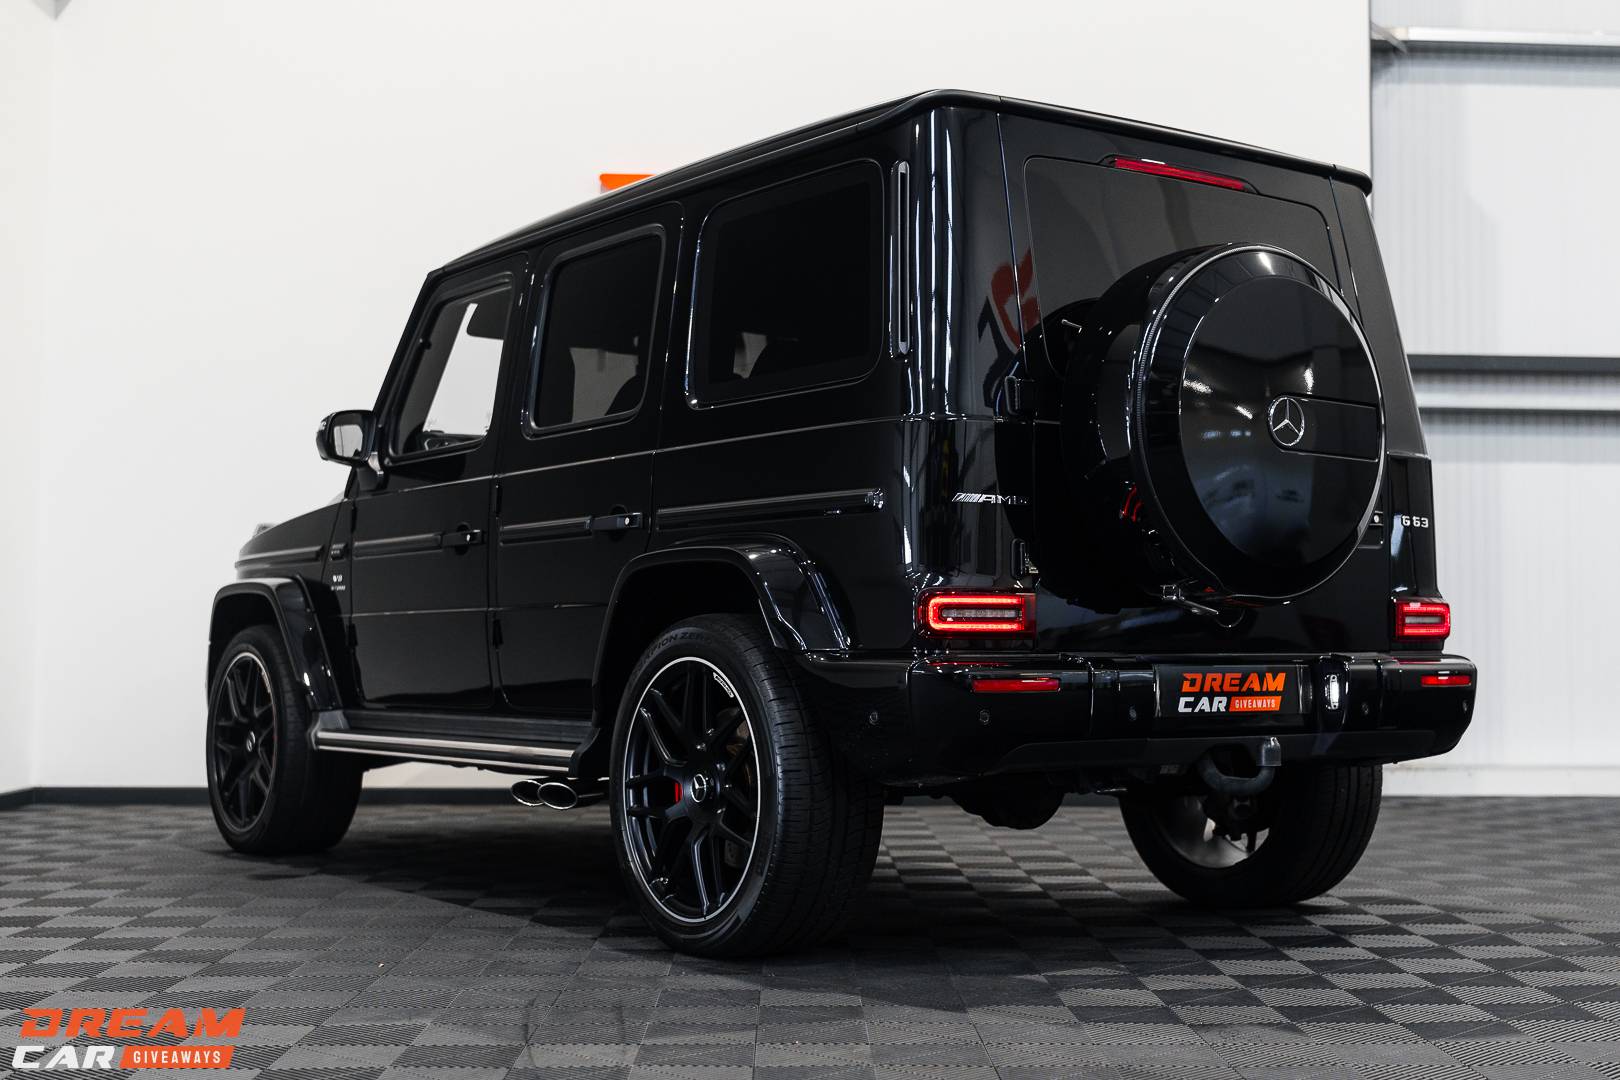 Win this Huracan Evo OR Mercedes-Benz G63 AMG & £10,000 or £140,000 Tax Free